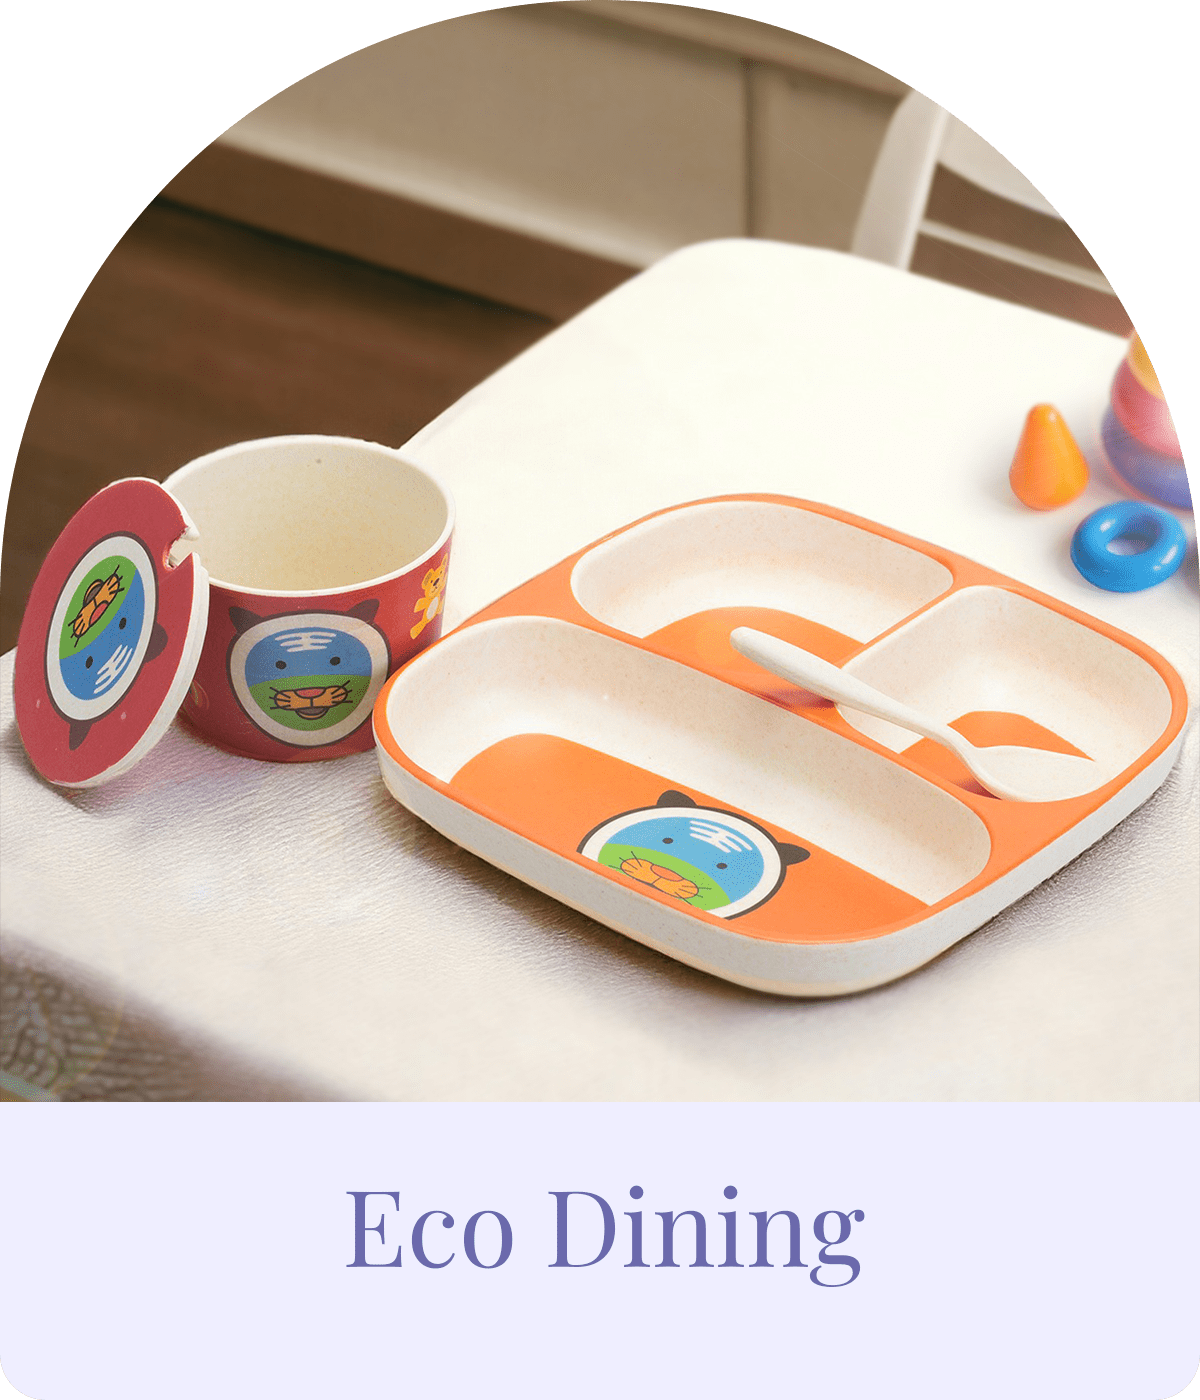 Eco-friendly kids' set, a sustainable and child-friendly collection of products designed with the environment in mind